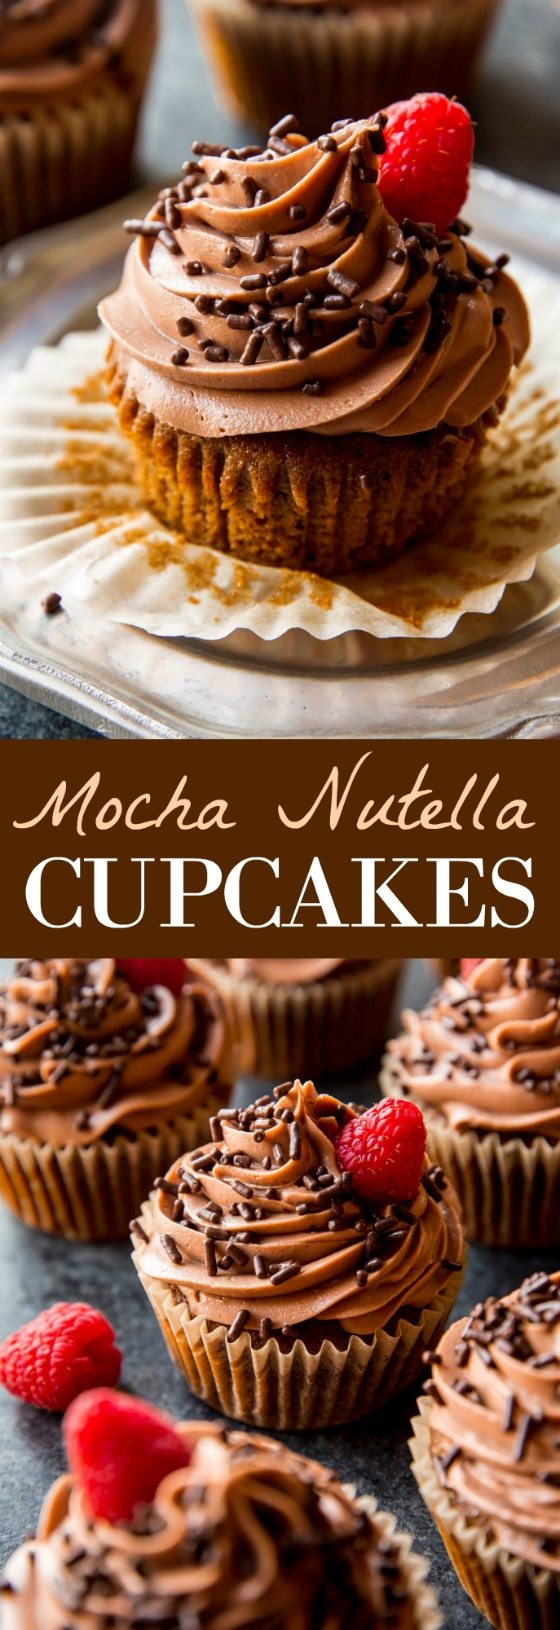 Soft, fluffy, and moist mocha nutella cupcakes with nutella frosting from Simply Beautiful Homemade Cakes! Recipe on sallysbakingaddiction.com